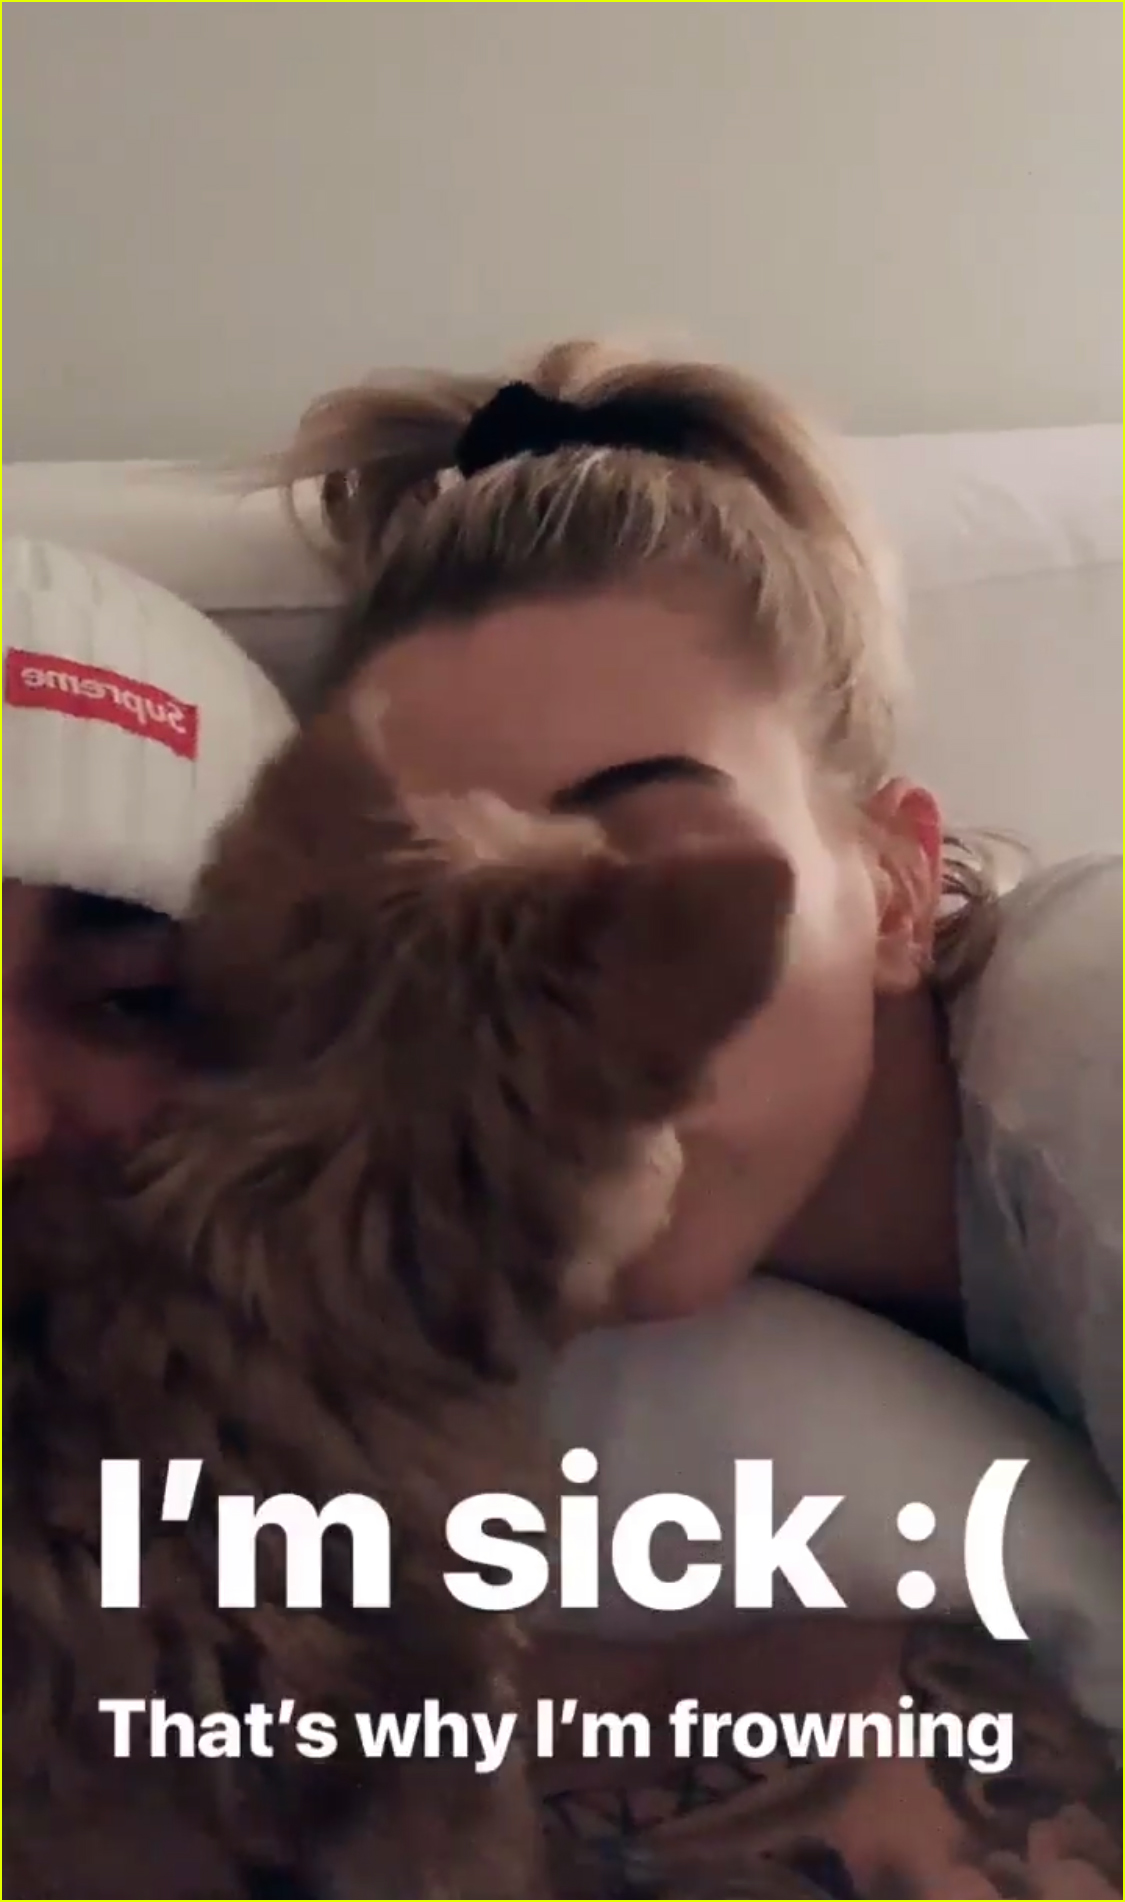 justin hailey bieber adopt adorable puppy for christmas 12